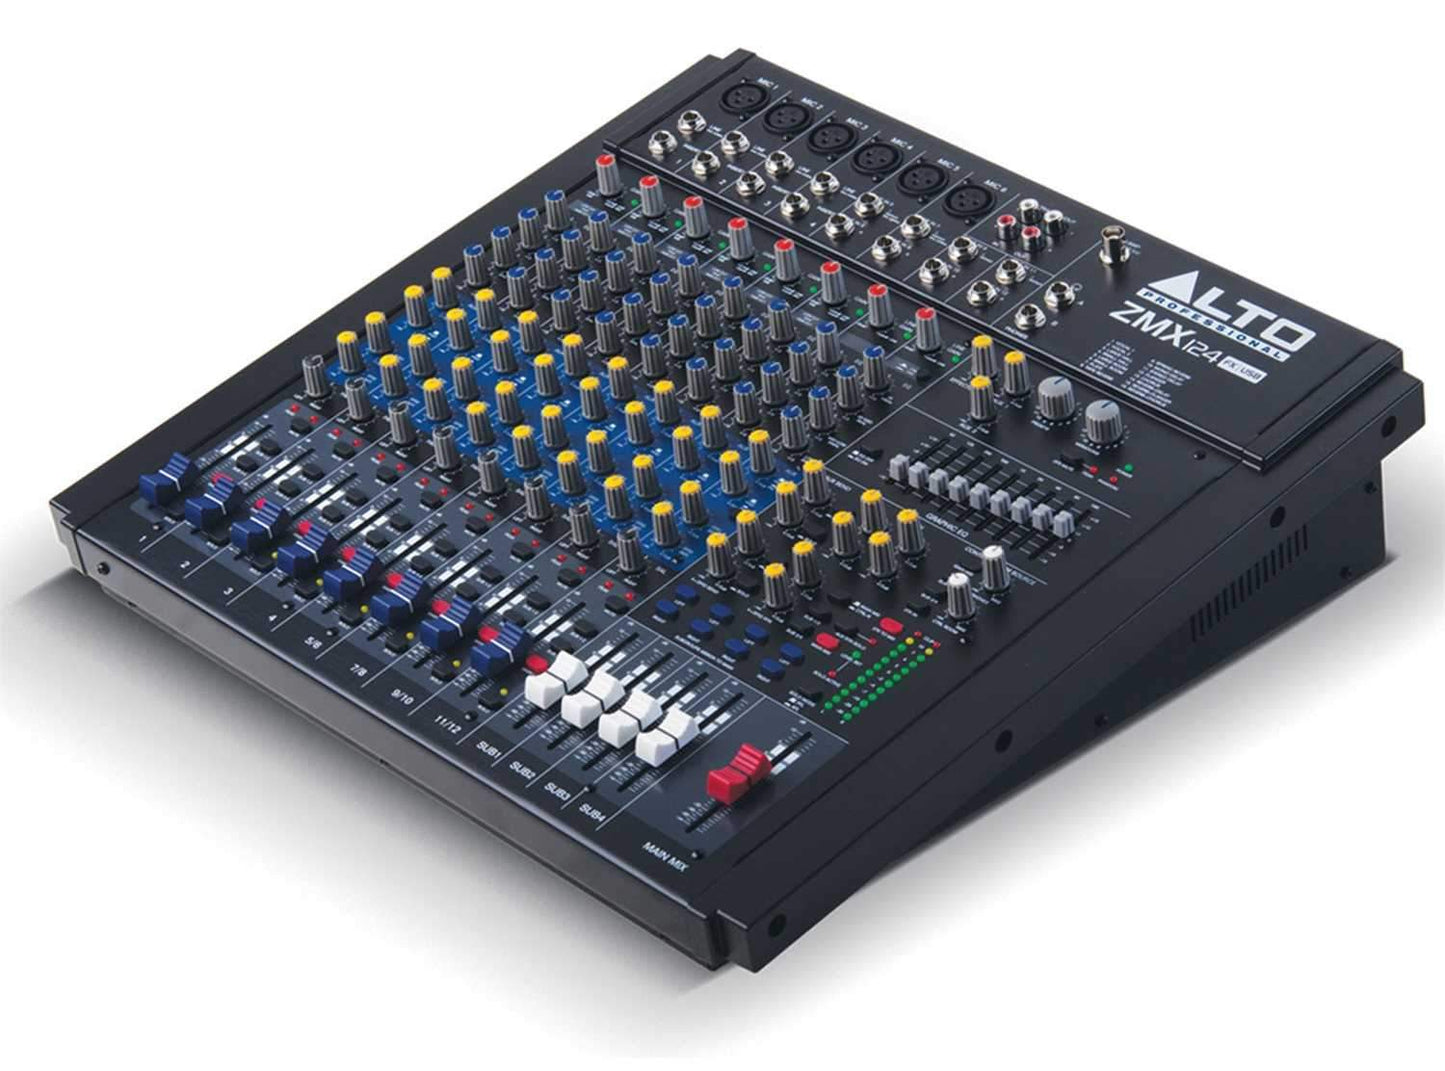 Alto Professional ZMX124FX 12 Ch Live Sound PA Mixer with USB - PSSL ProSound and Stage Lighting